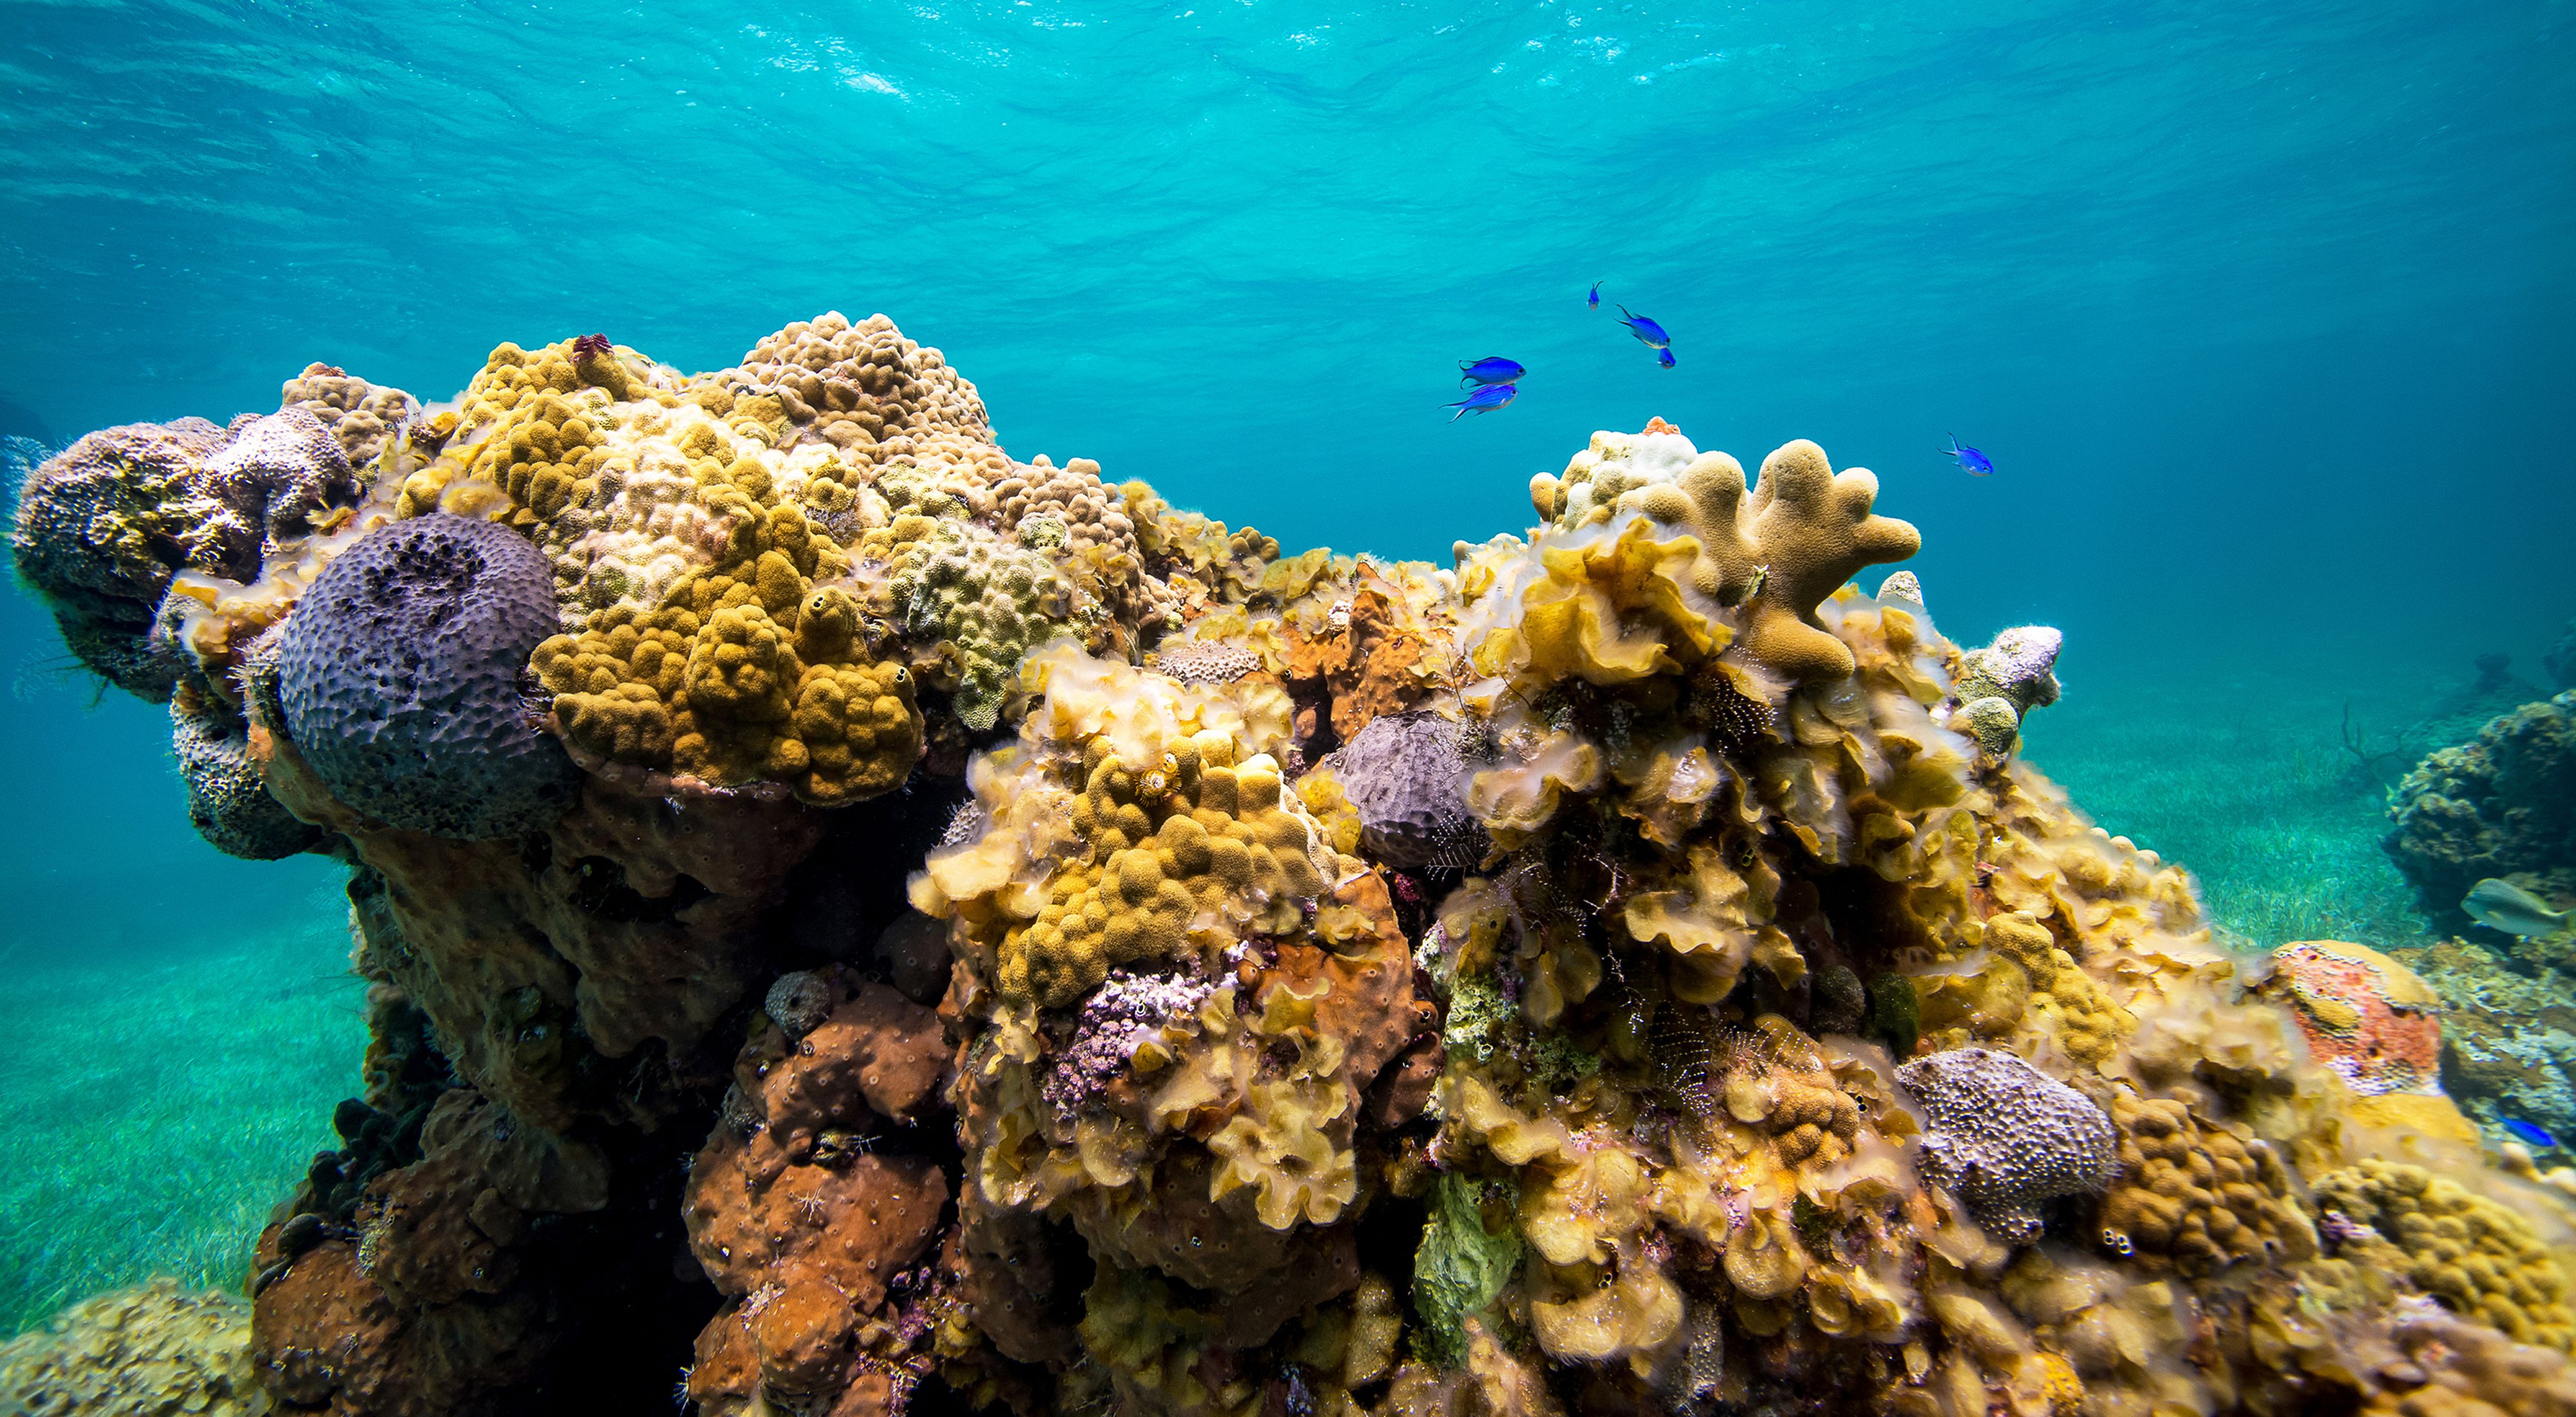 Small blue tropical fish swim in crystal clear water above a large, healthy coral reef.